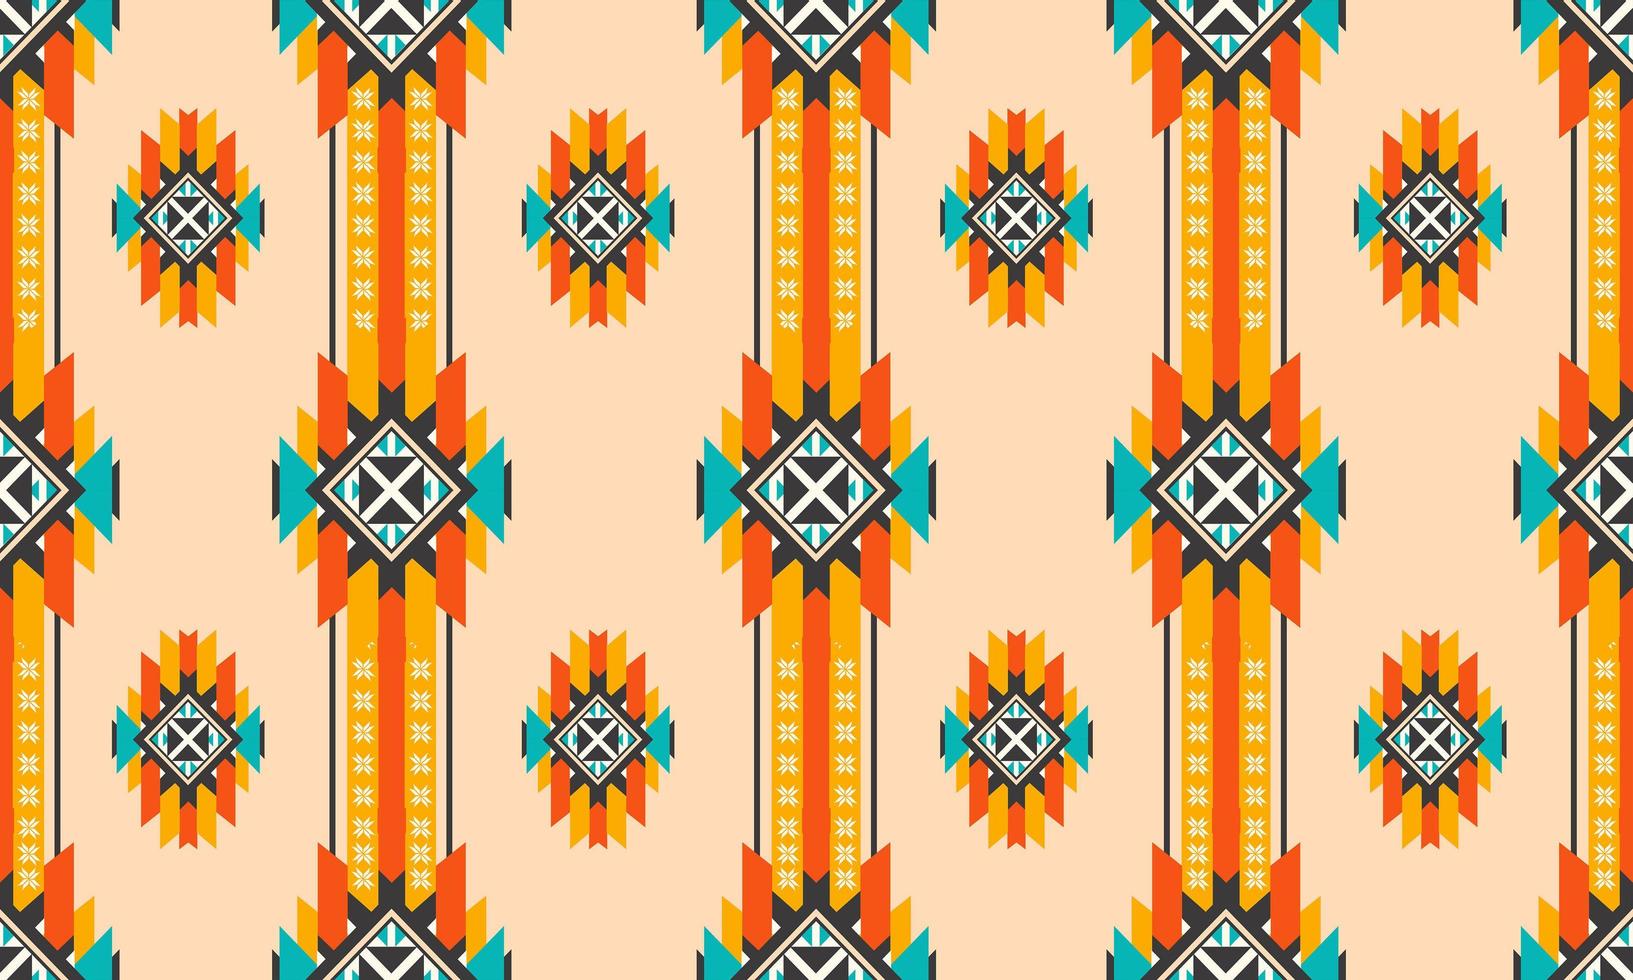 Oriental ethnic seamless pattern vector traditional background Design for carpet,wallpaper,clothing,wrapping,batik,fabric,Vector illustration embroidery style.